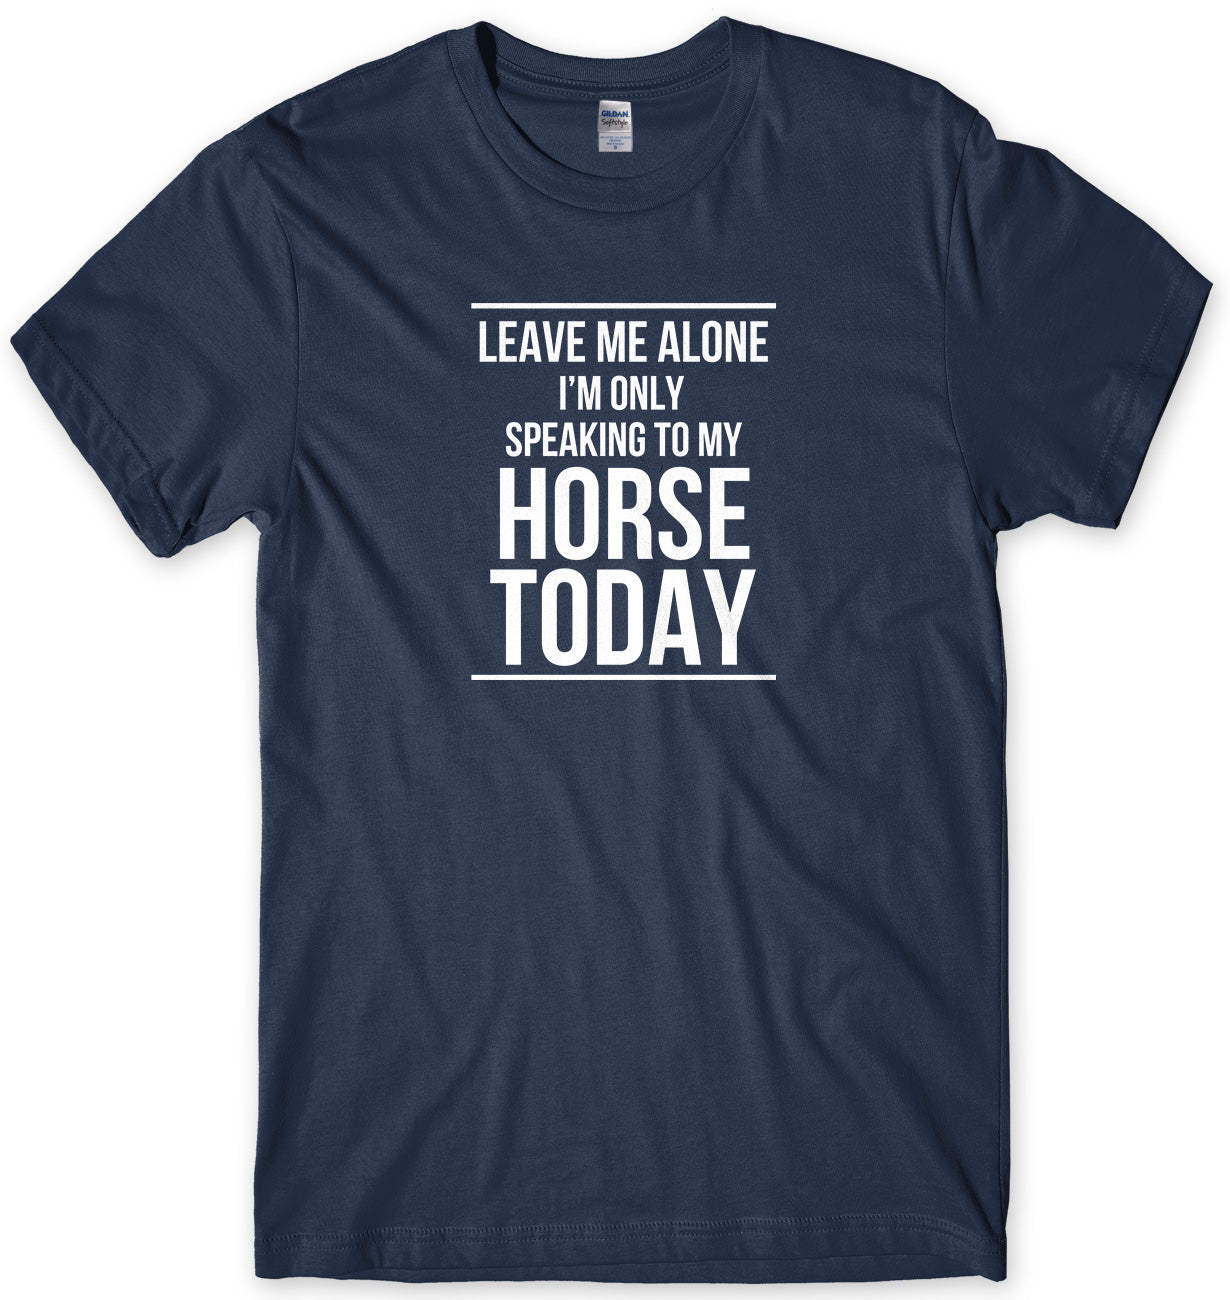 LEAVE ME ALONE I'M ONLY SPEAKING TO MY HORSE TODAY MENS FUNNY SLOGAN UNISEX T-SHIRT